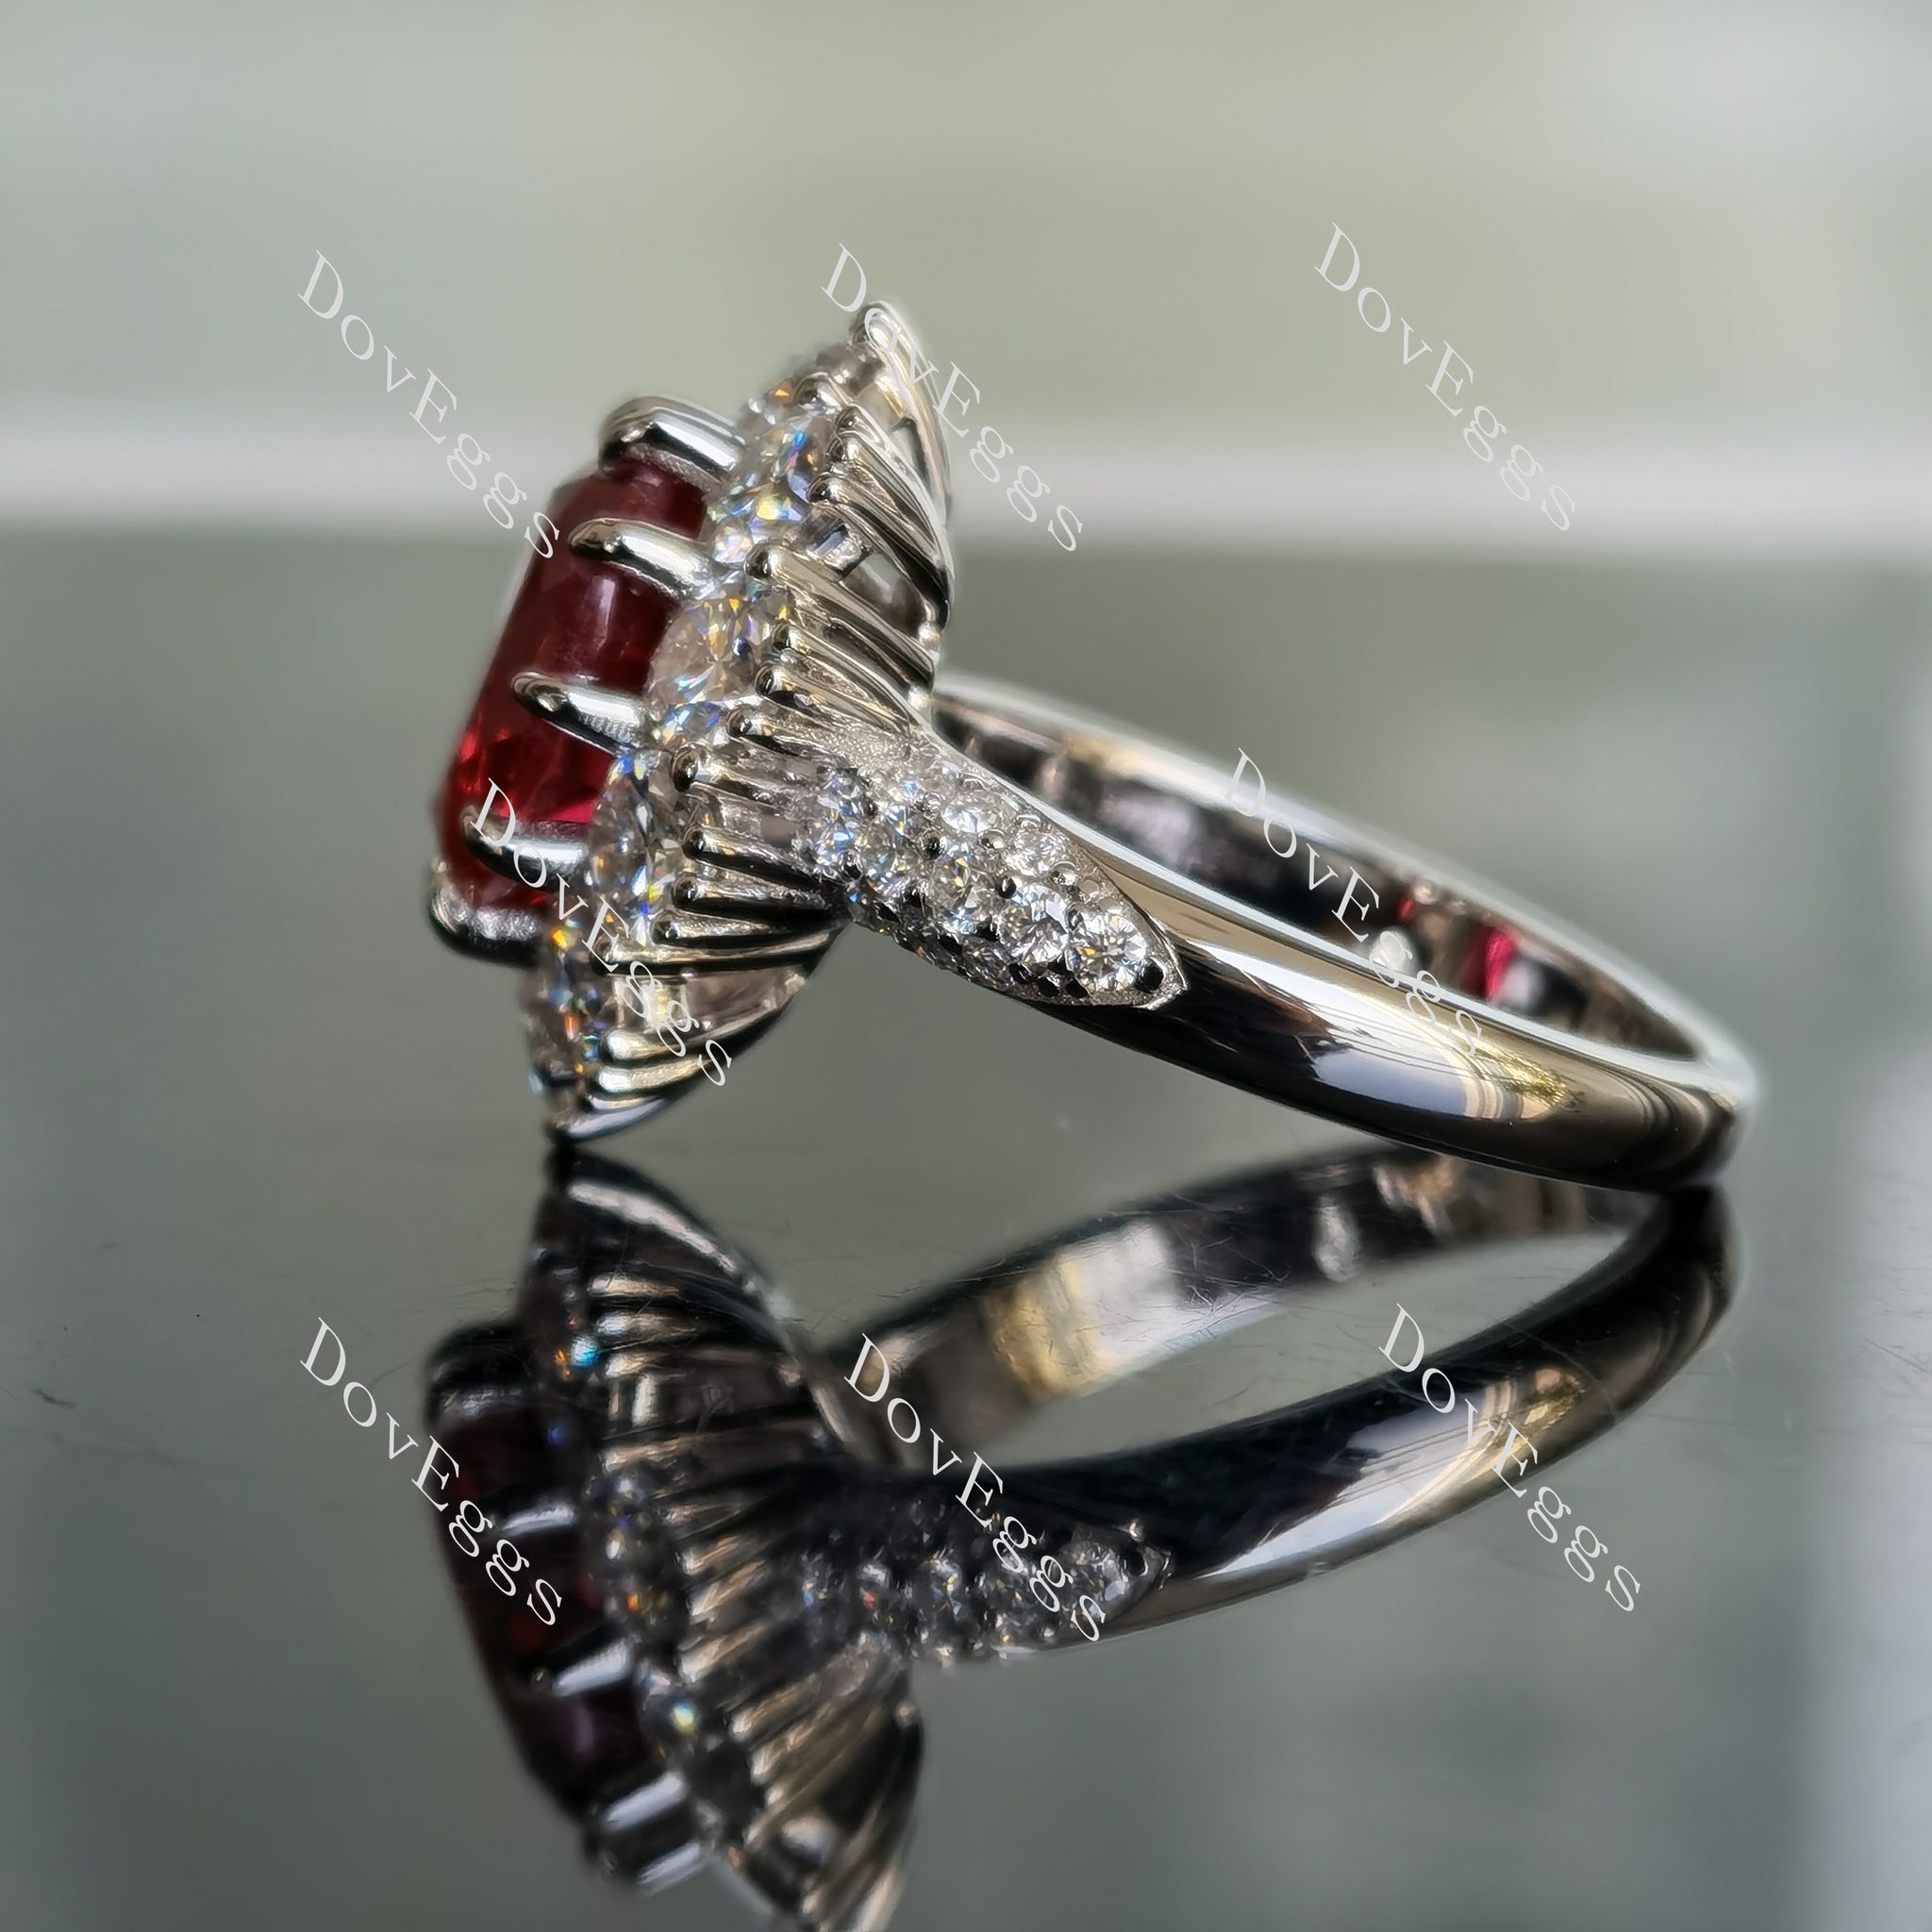 DovEggs oval halo vivid pegion blood ruby colored gem engagement ring